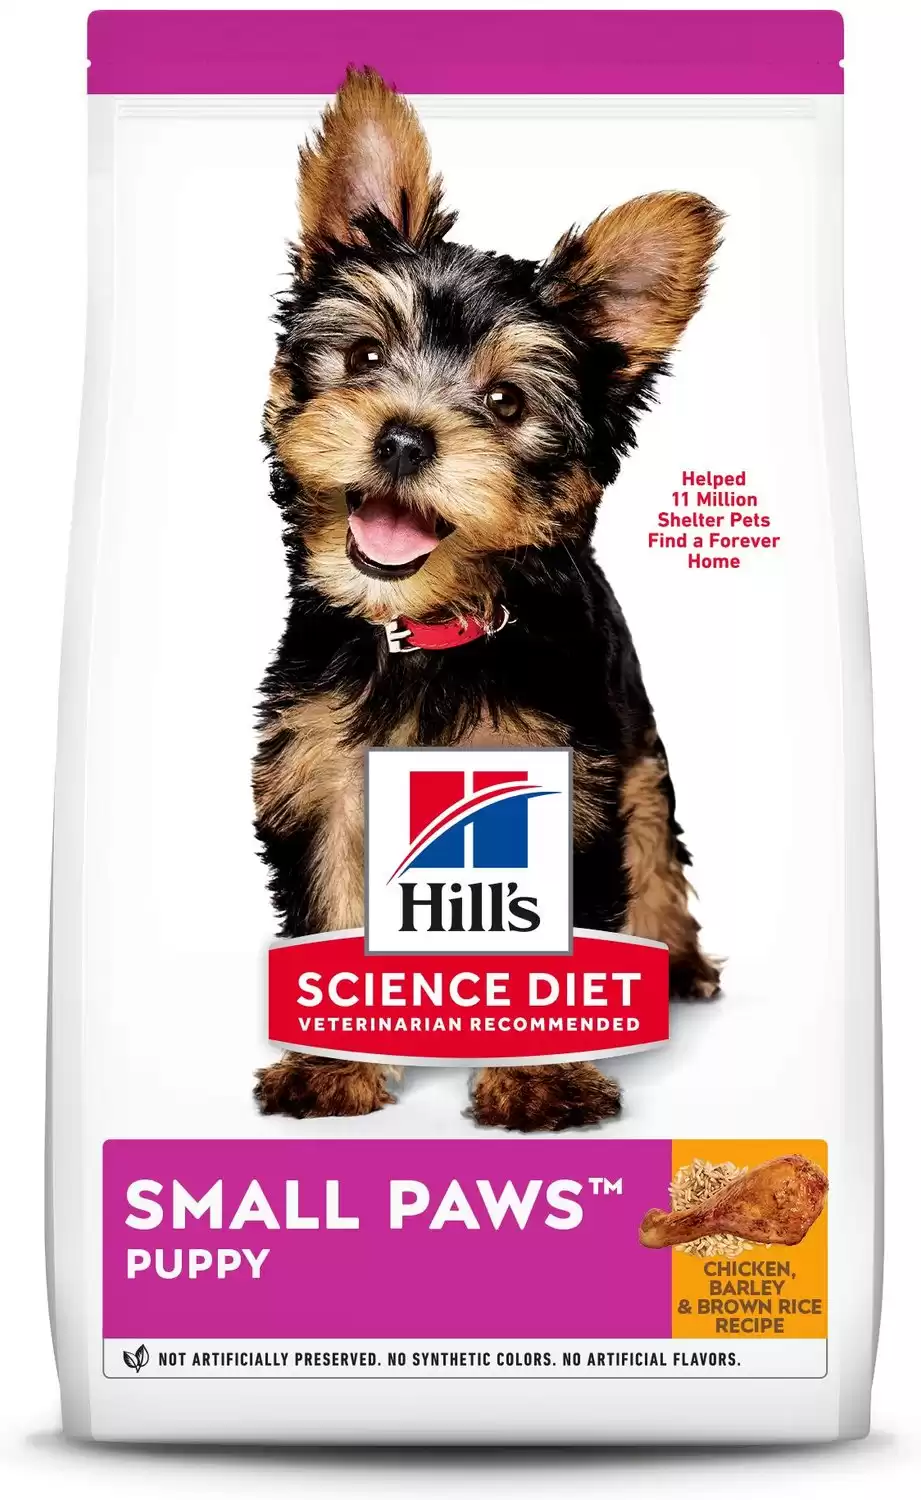 Hill's Science Diet Small Paws Puppy Food